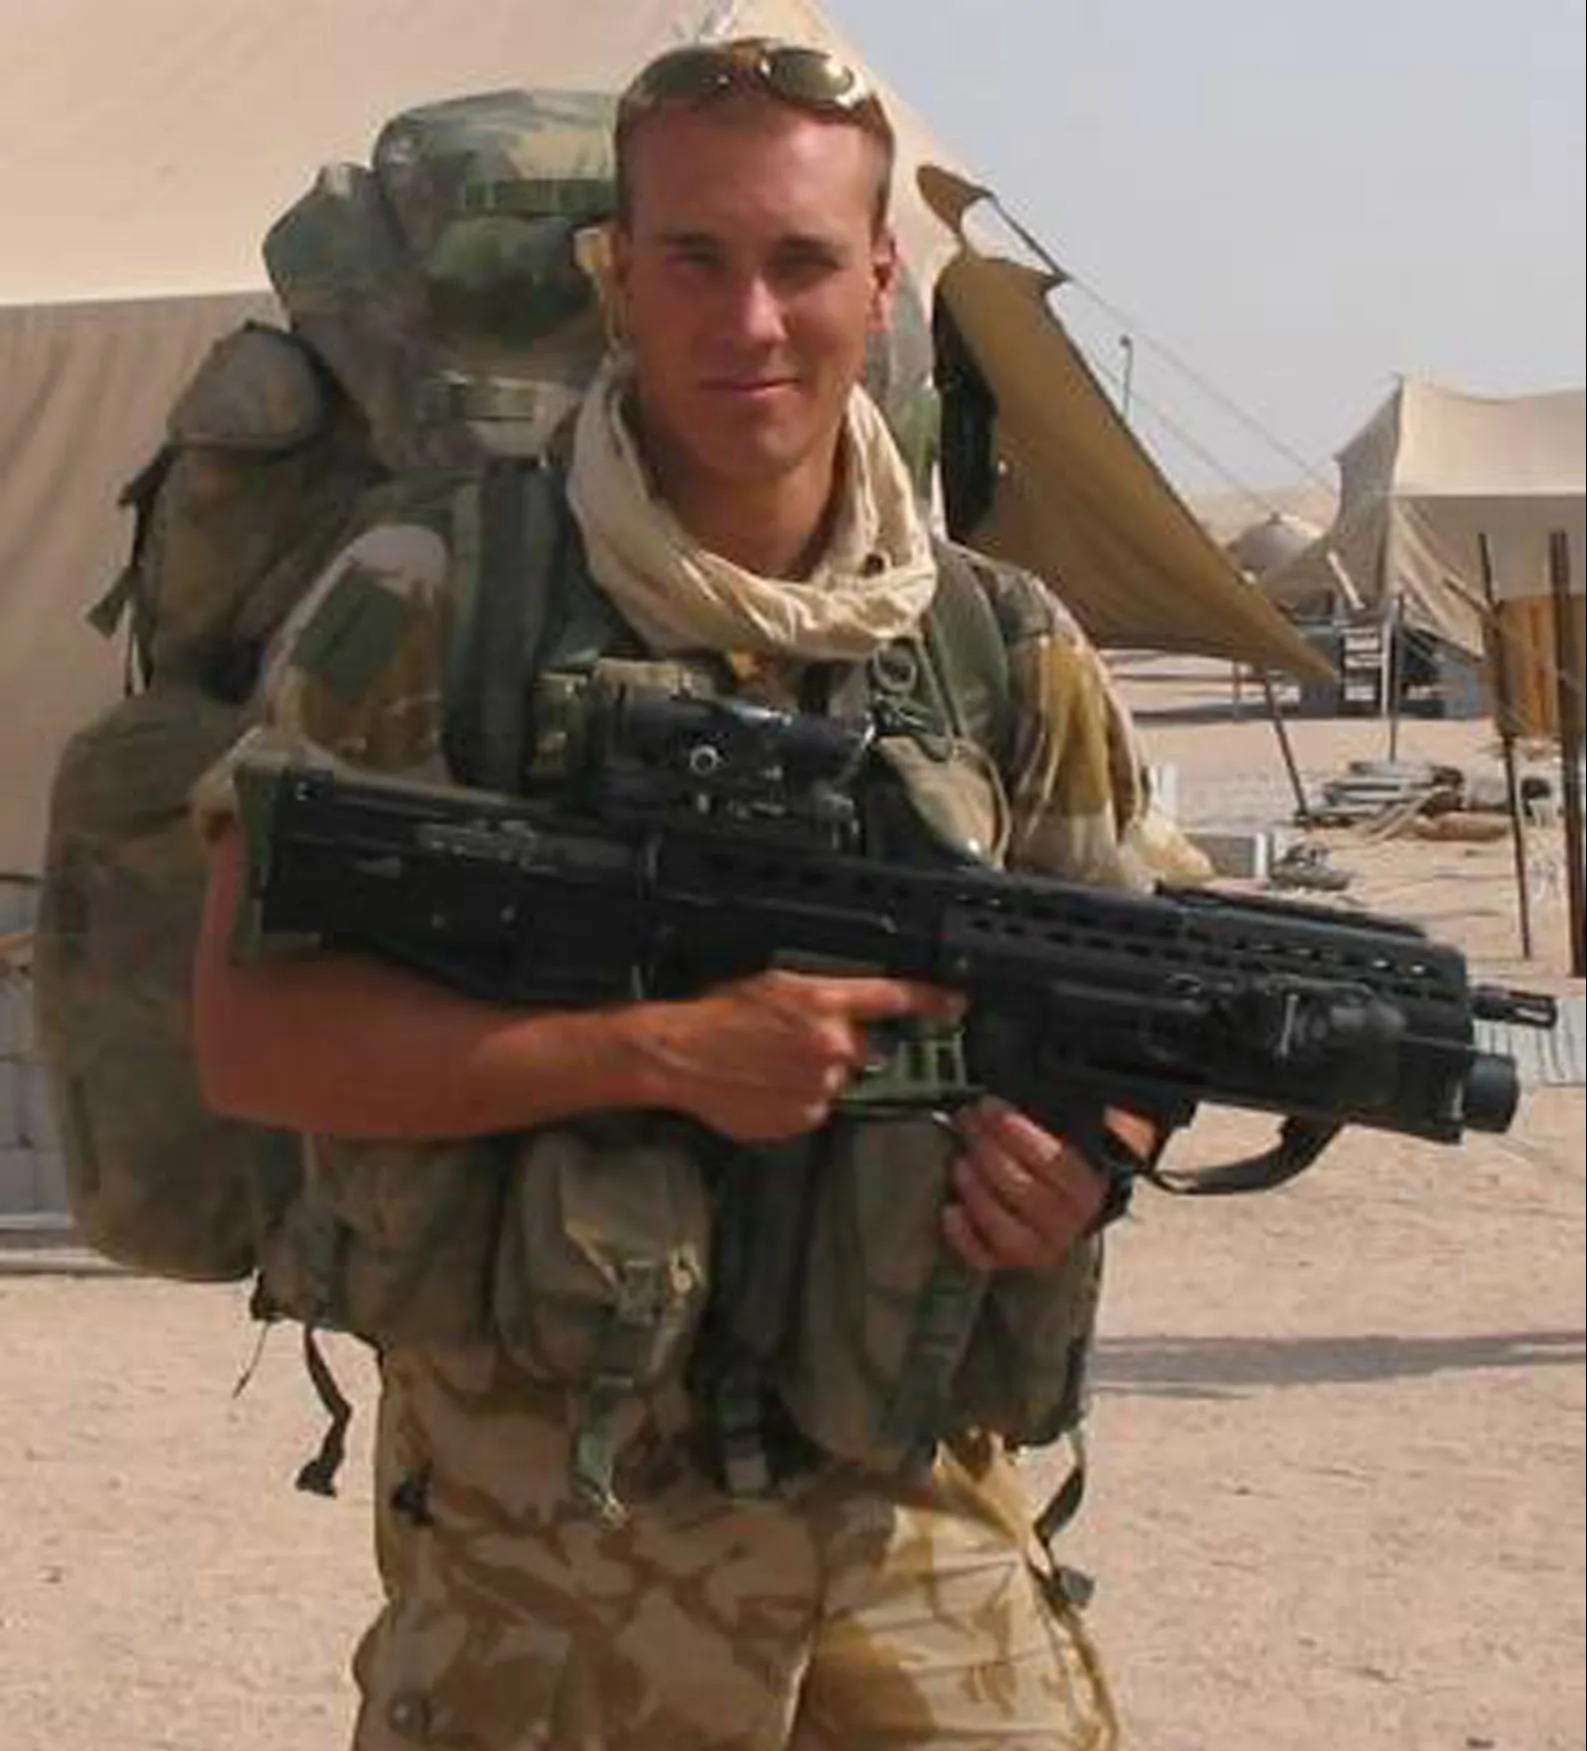 Lance corporal Matthew Croucher saved his colleagures by diving in front of a grenade qhiqquiqdtiqrinv